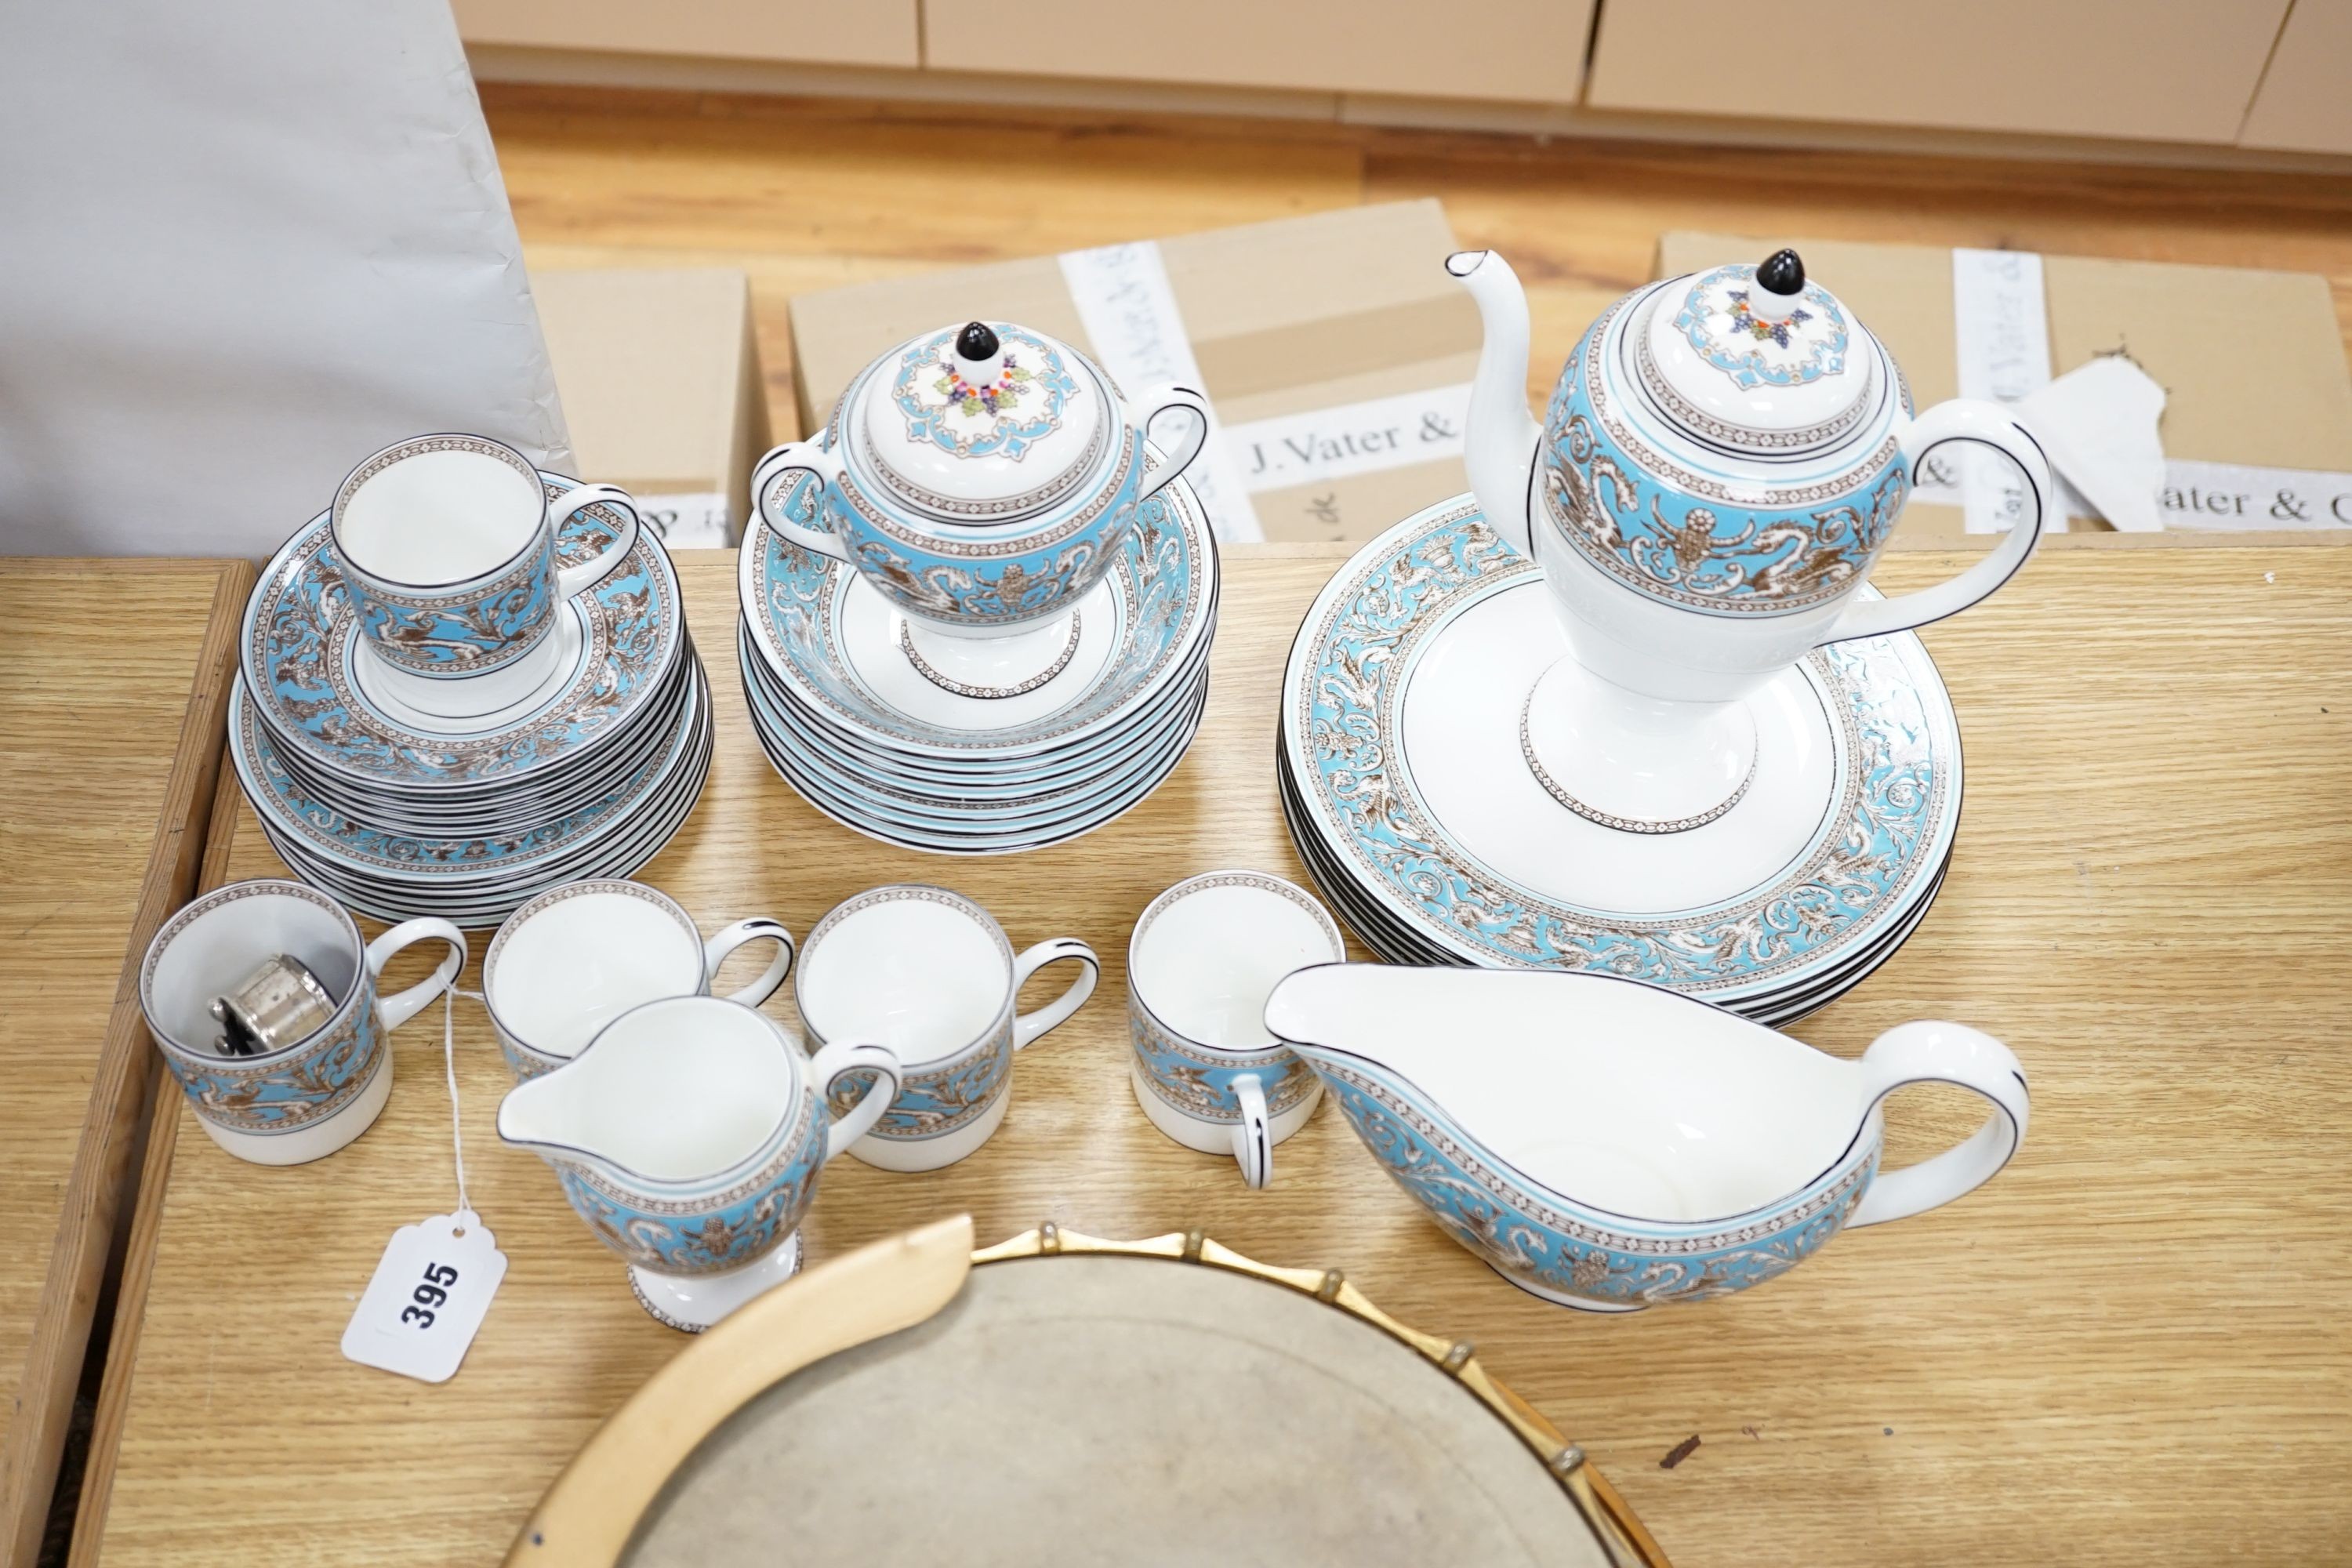 A Wedgwood Florentine coffee and dinner wares and a silver salt